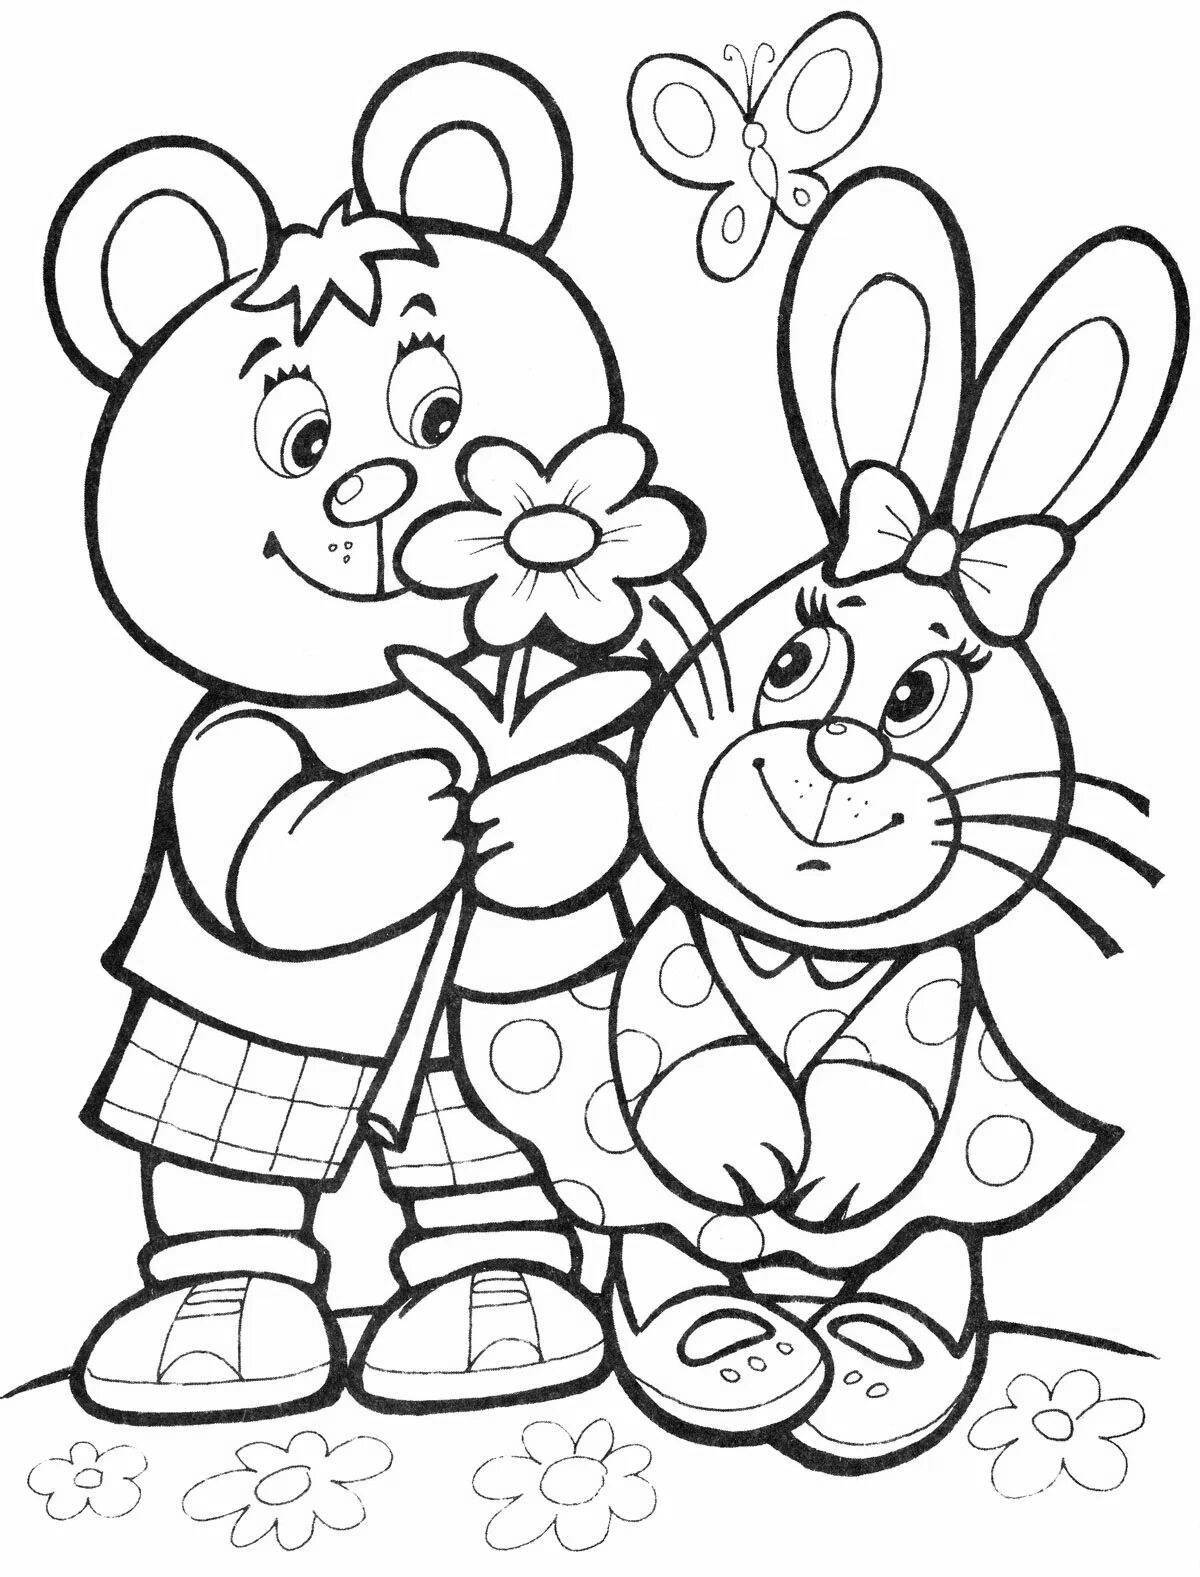 Tempting bear and hare coloring page